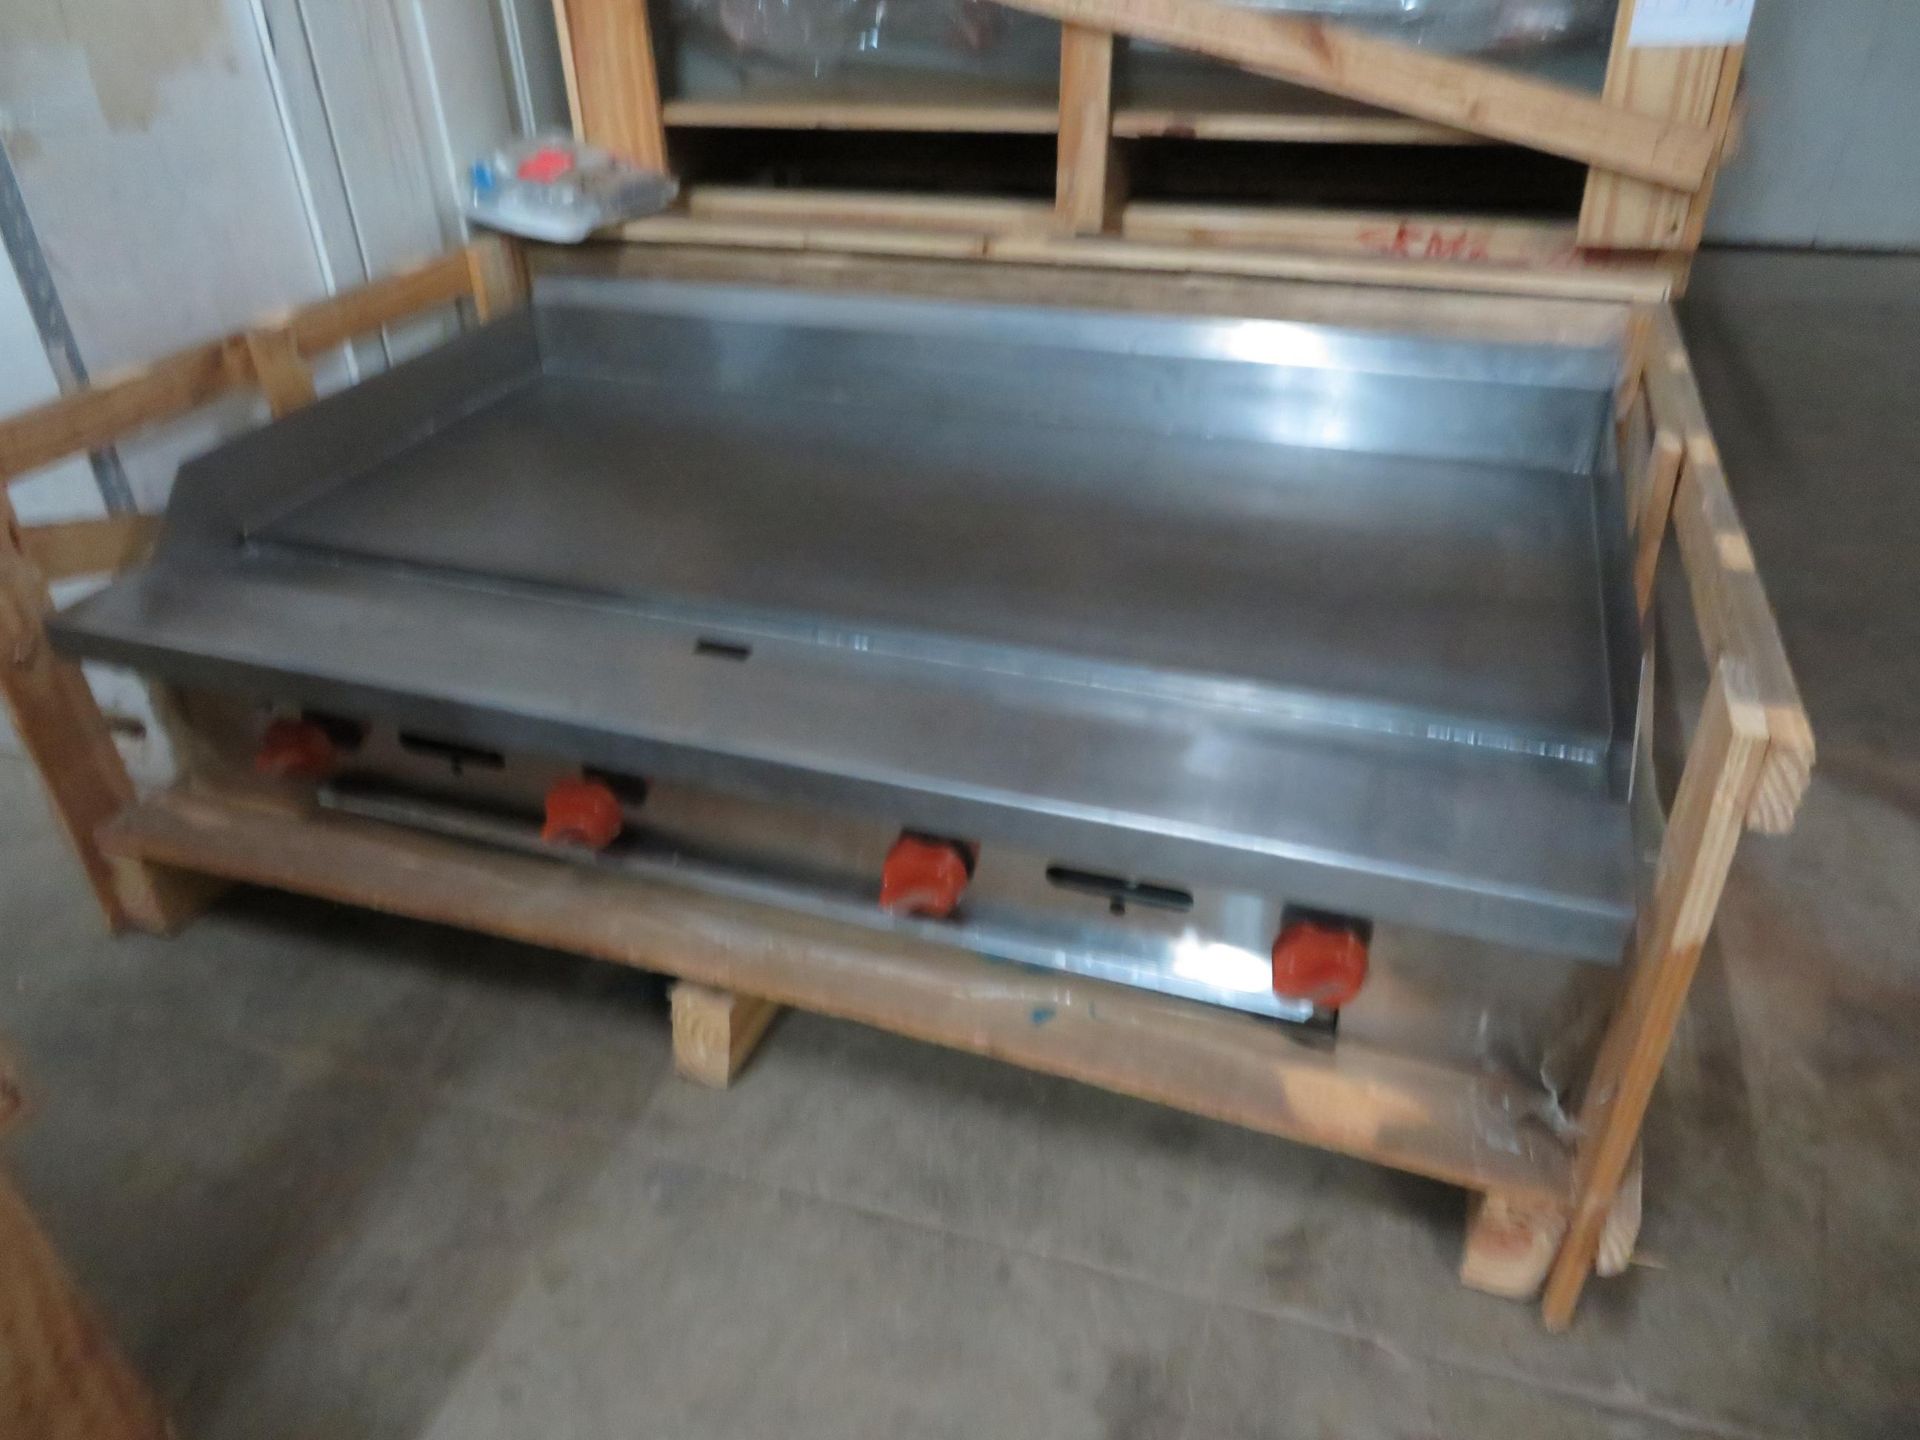 Brand New SIERRA 48" hot plate/griddle Mod #SRMG-48 (natural gas) approx. 48"w x 30"d x 9"h